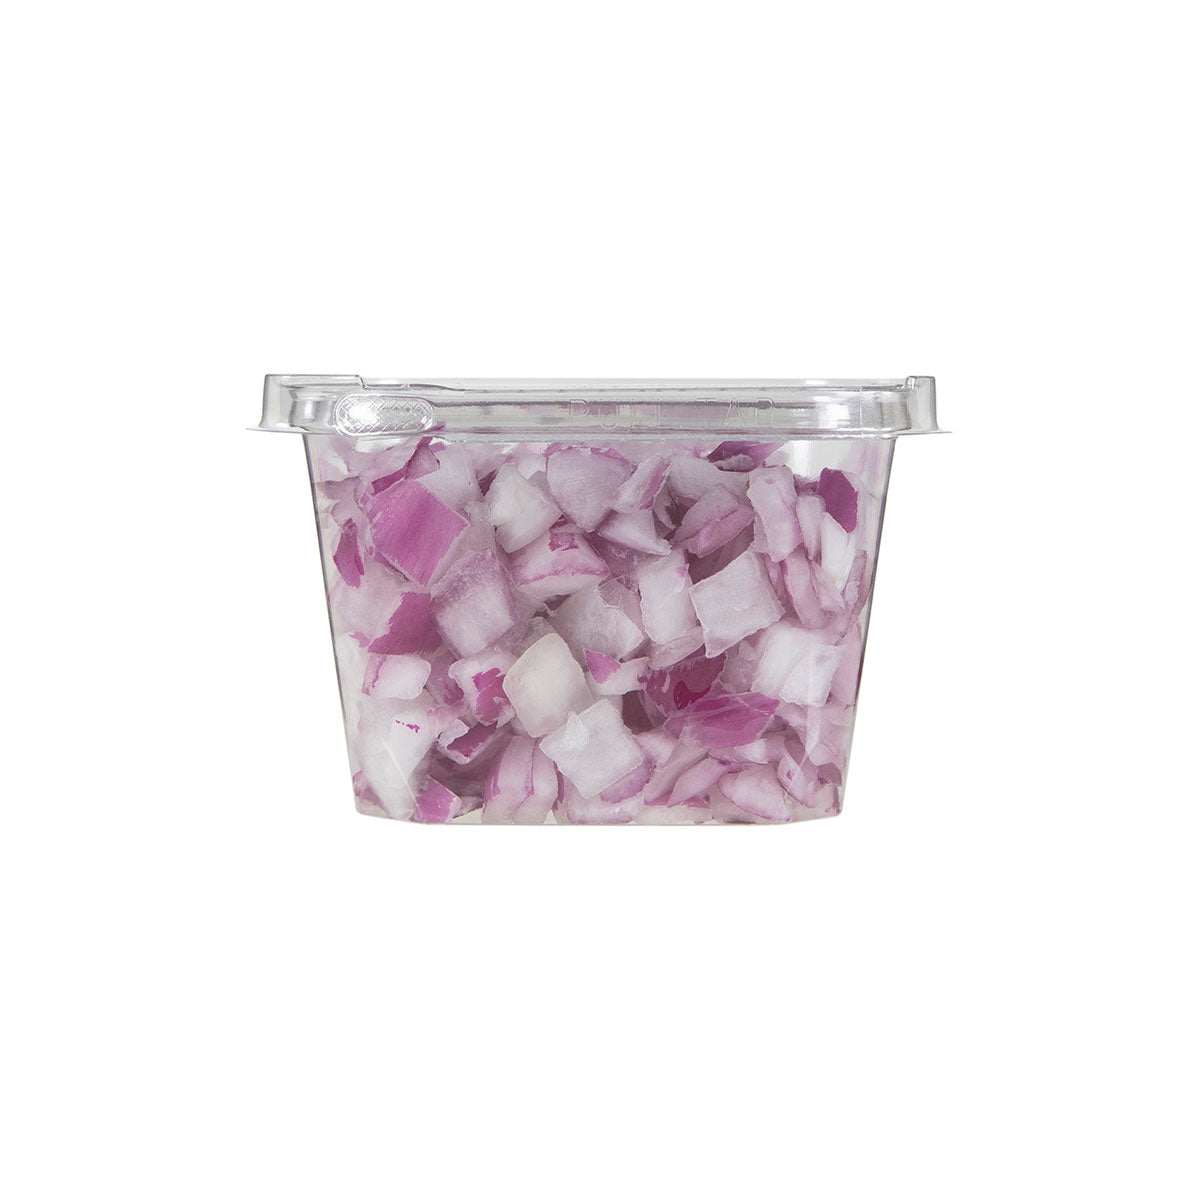 Urban Roots Organic Diced Red Onions 10 OZ